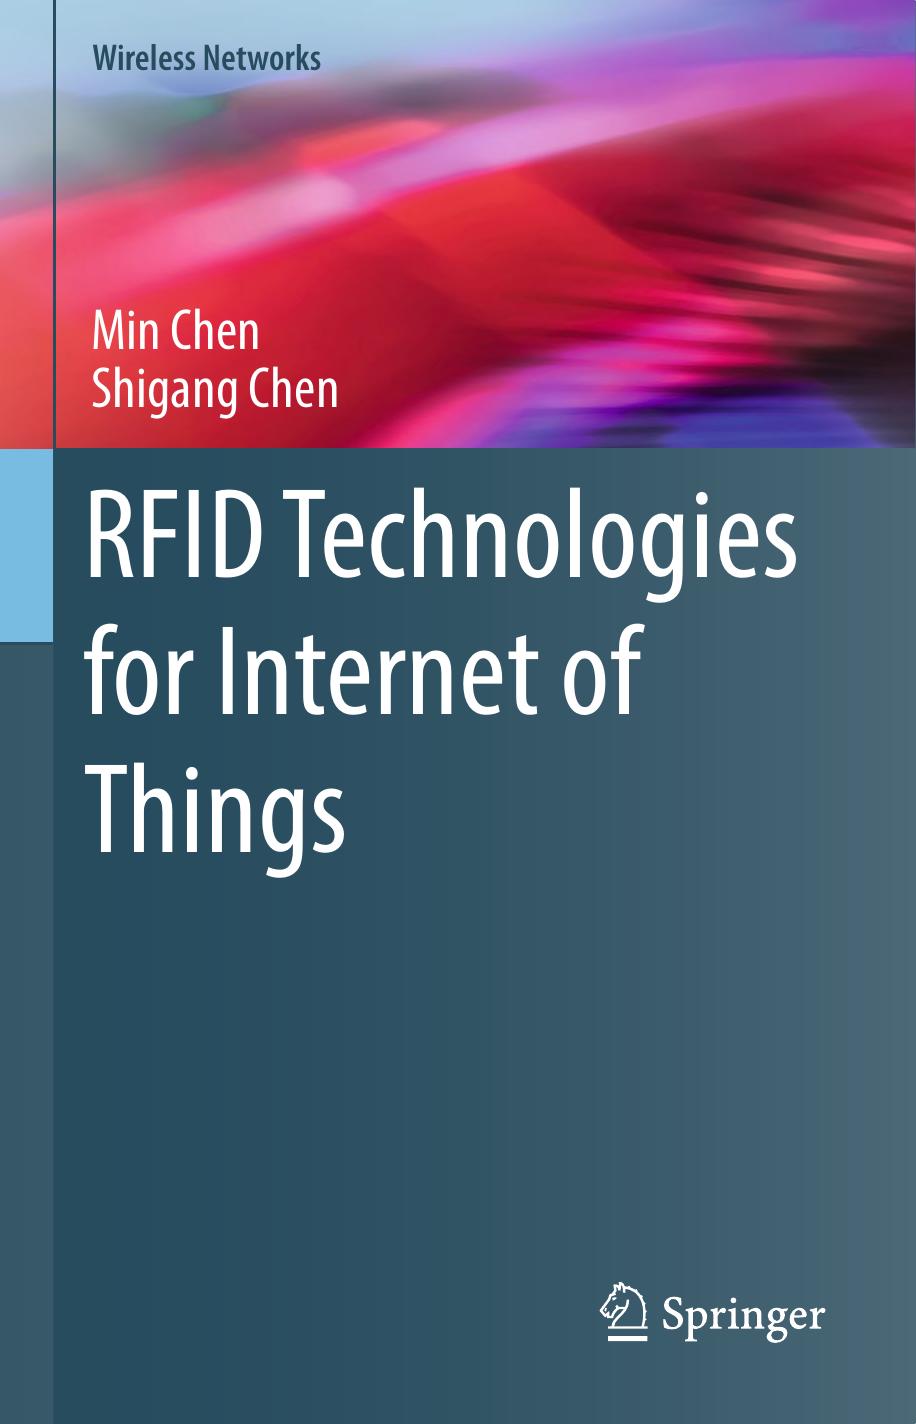 RFID Technologies for Internet of Things